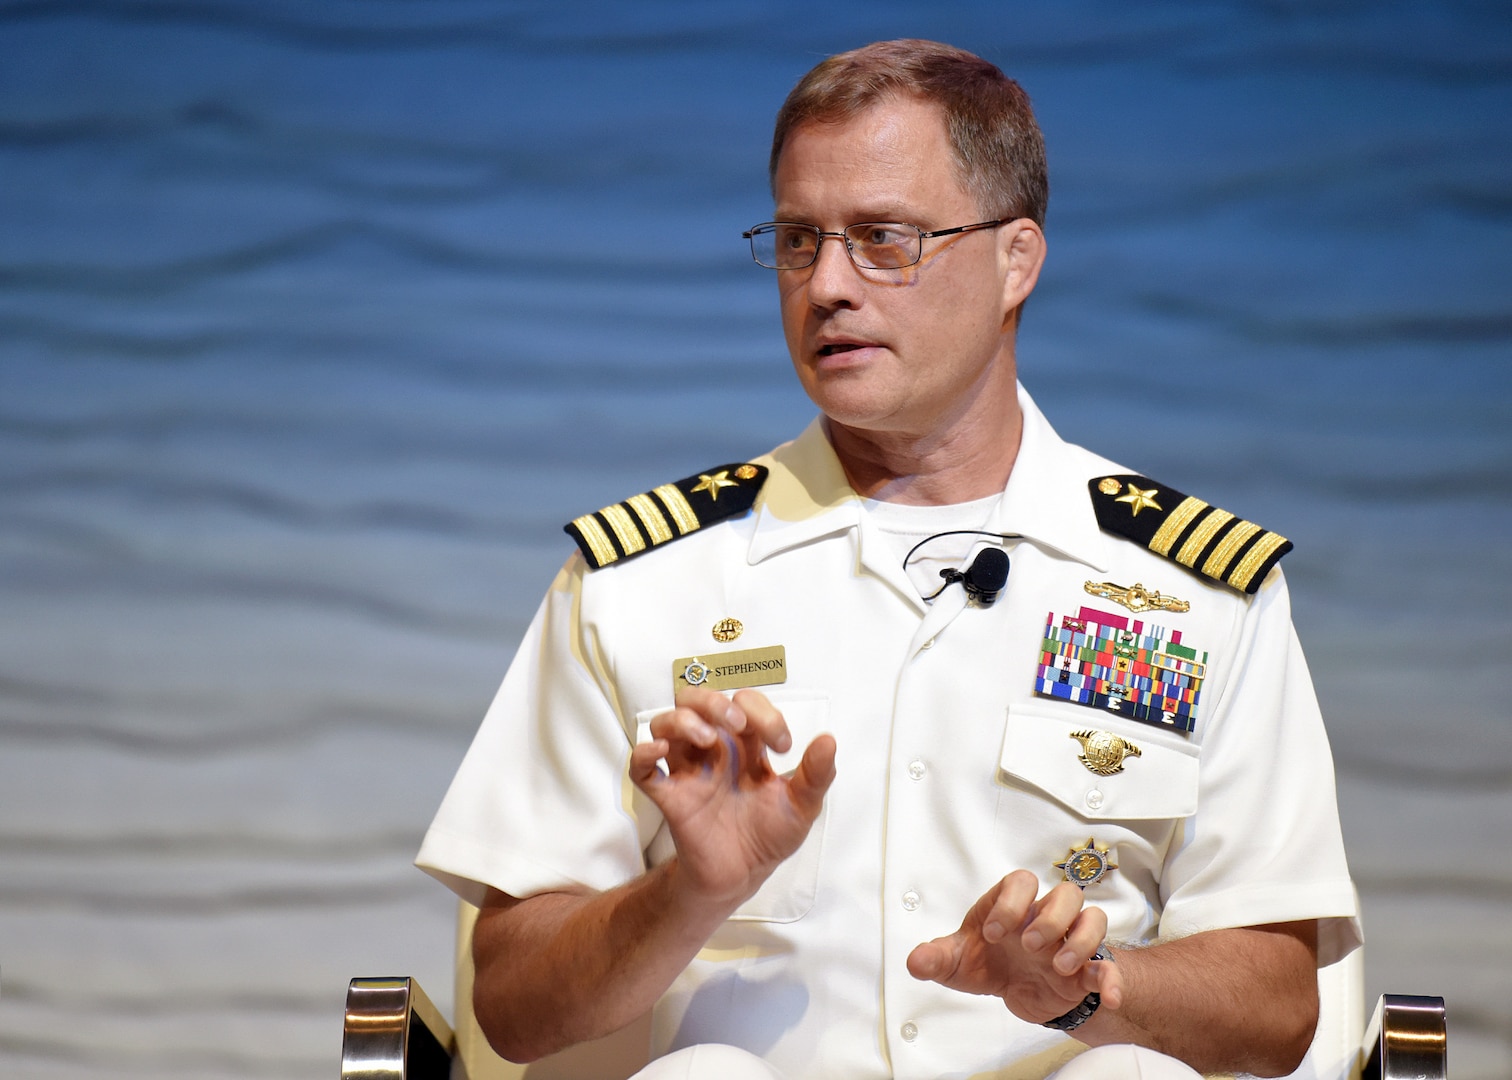 Capt. Henry A. Stephenson, U.S. Transportation Command director of intelligence, discusses the challenges of intelligence support to cyber defense